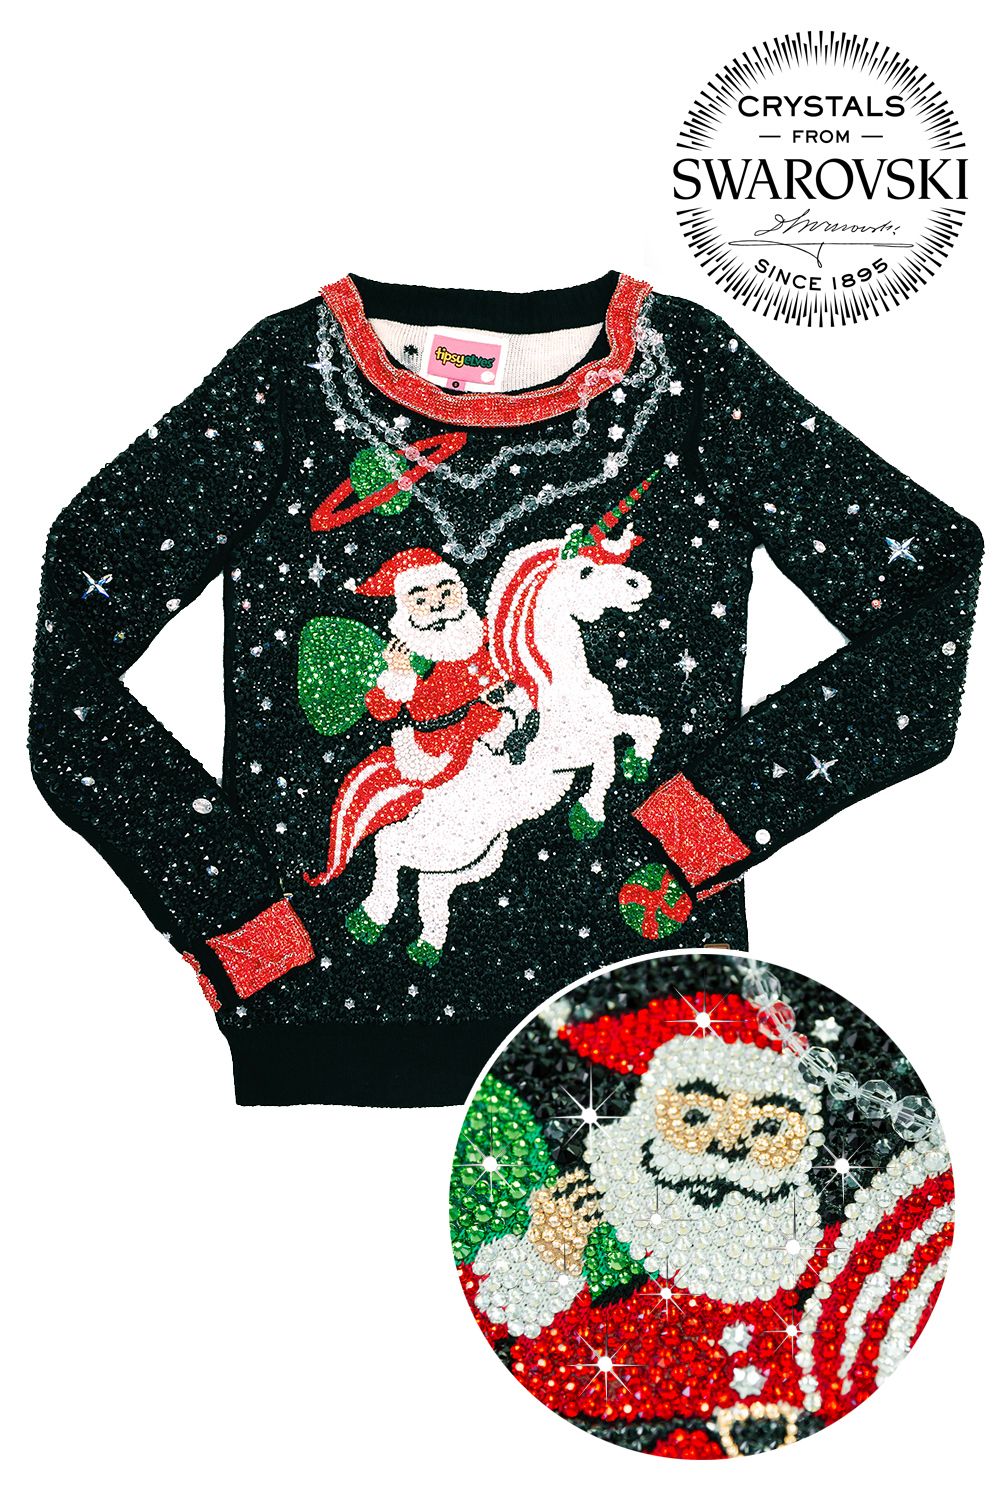 Christmas Jumper Day - Take part in our photo competition